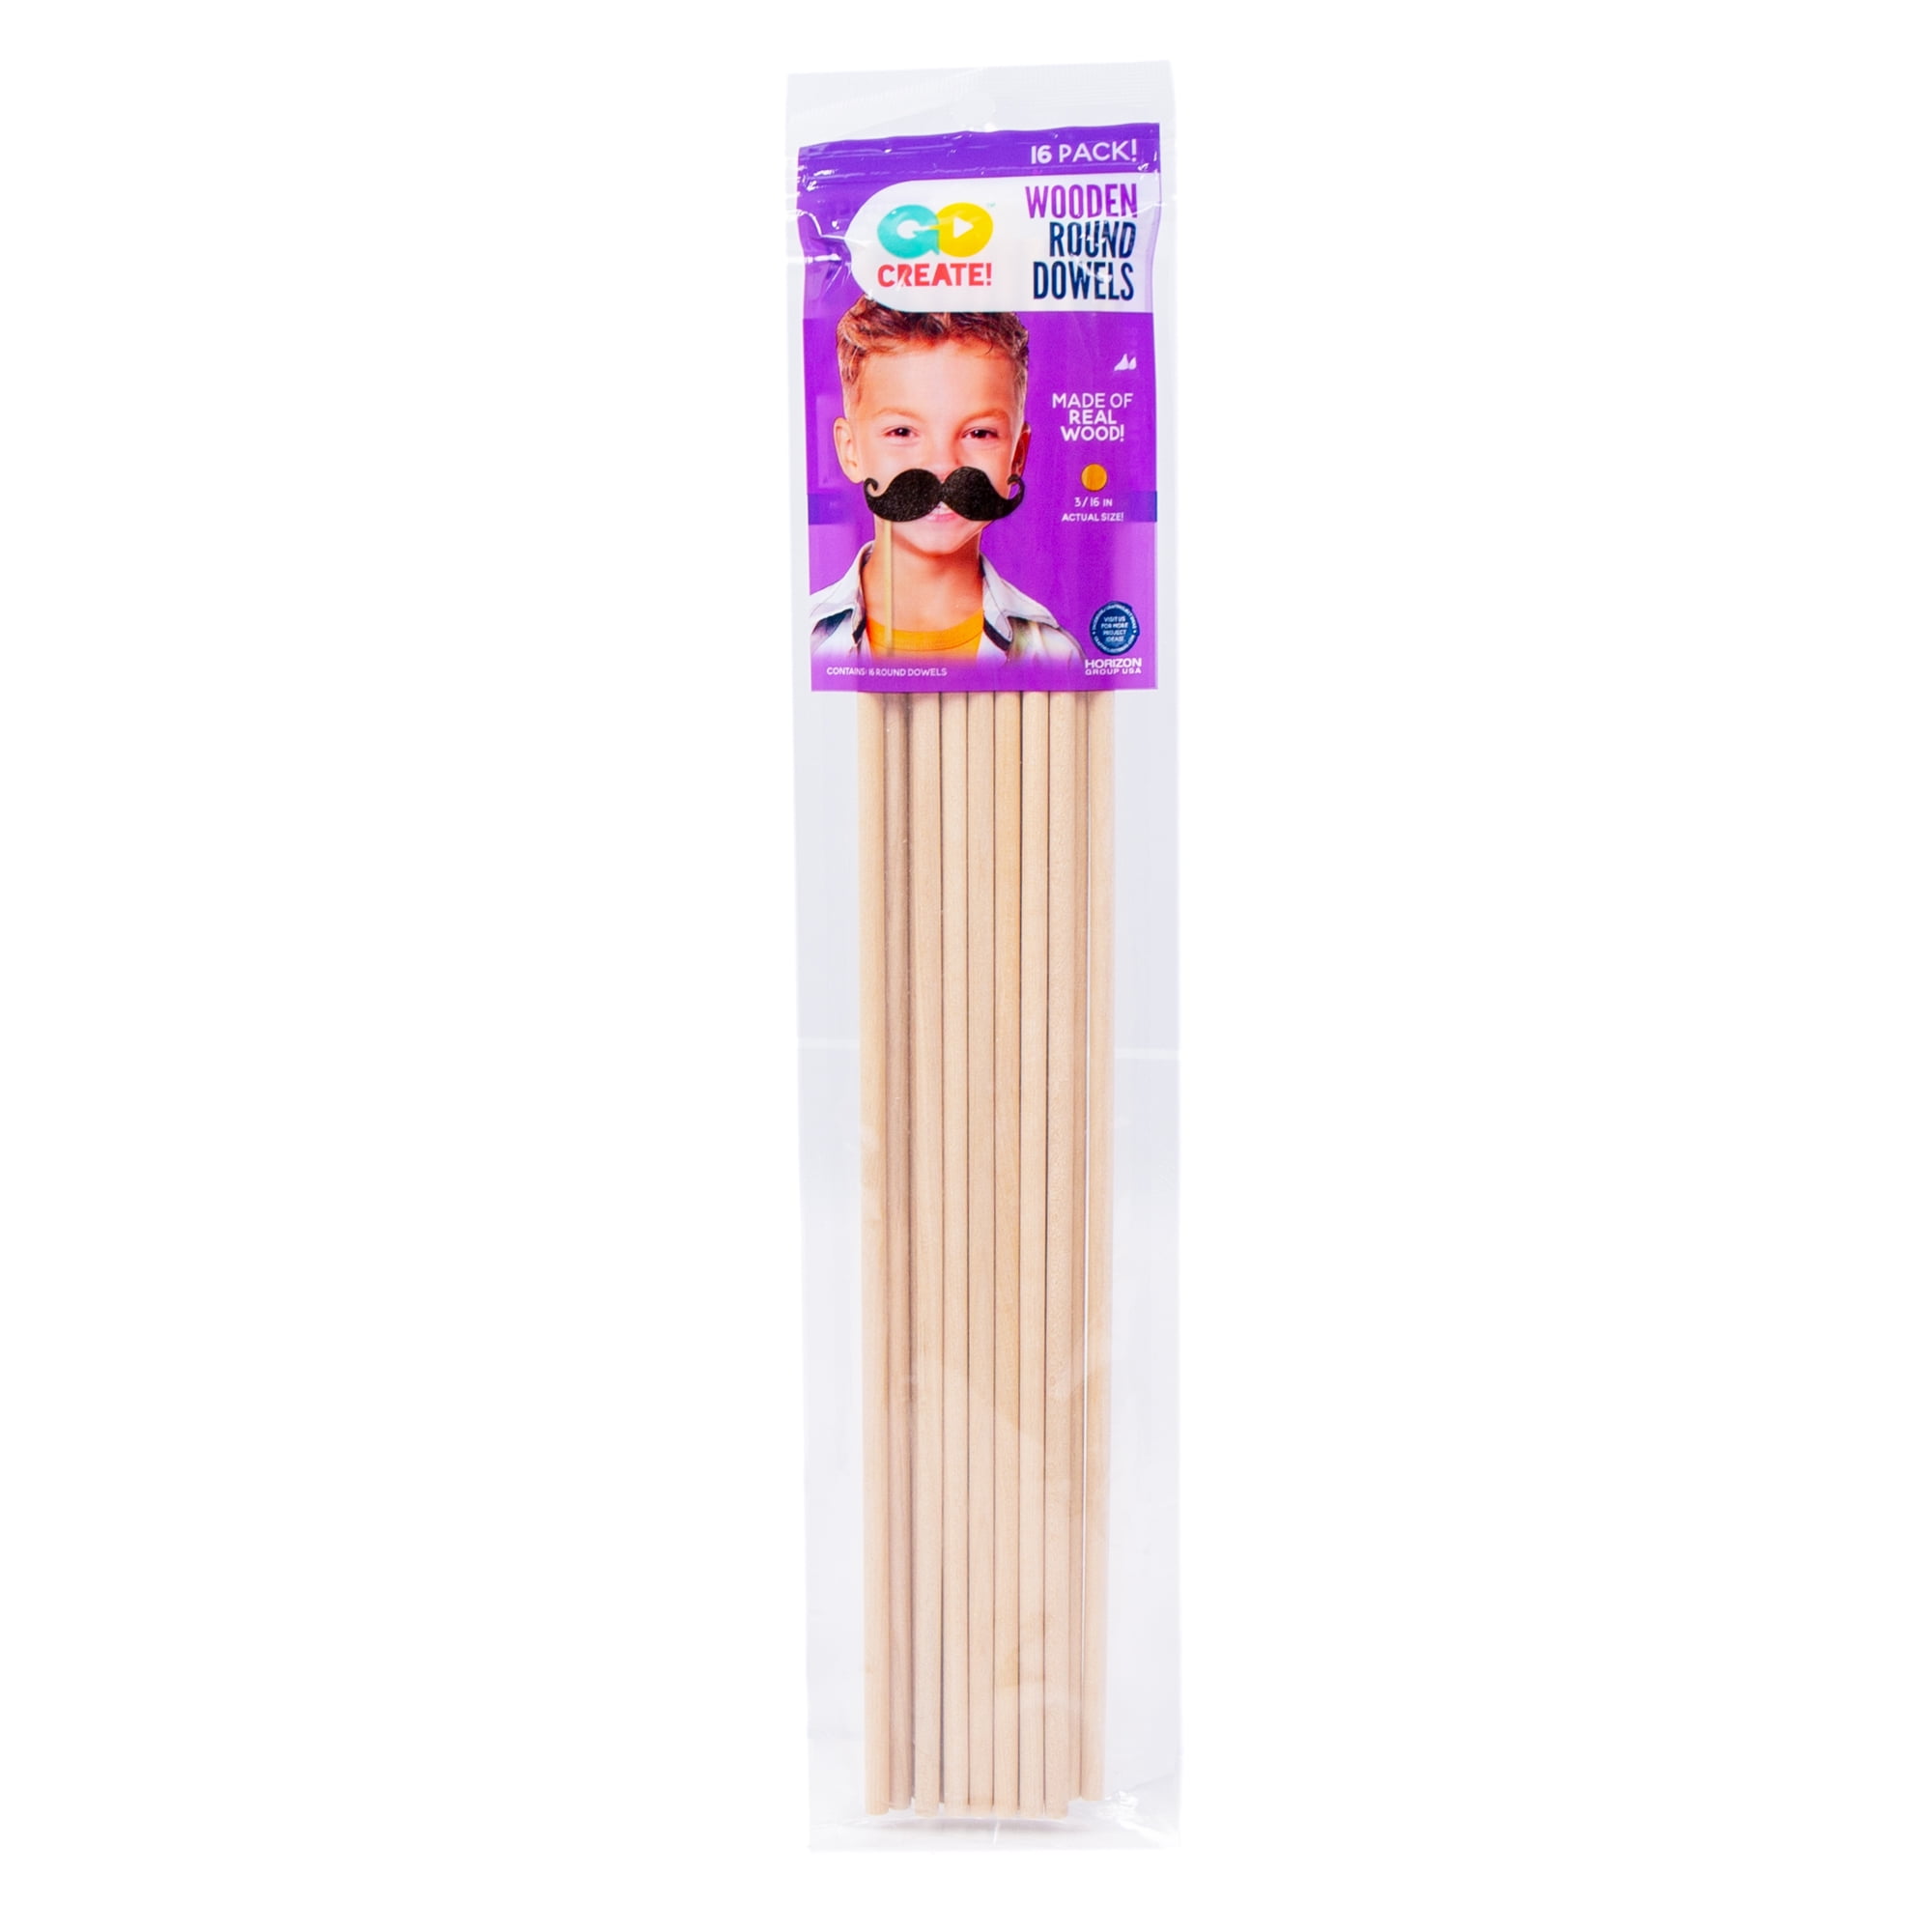 Go Create 3/16-inch Wooden Round Dowels, 16-Pack